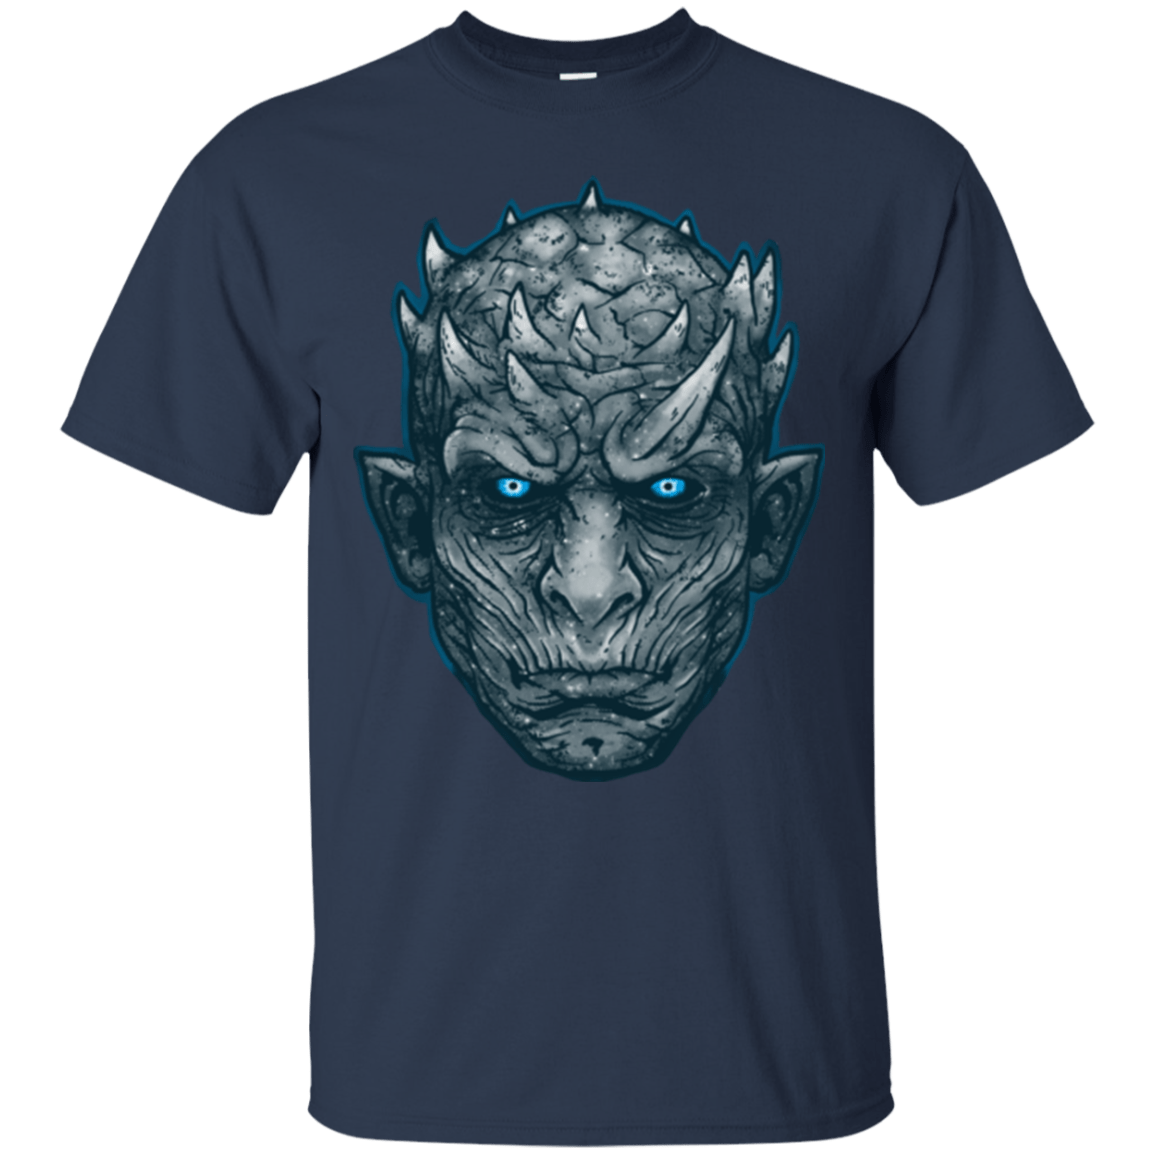 T-Shirts Navy / Small The Other King2 T-Shirt